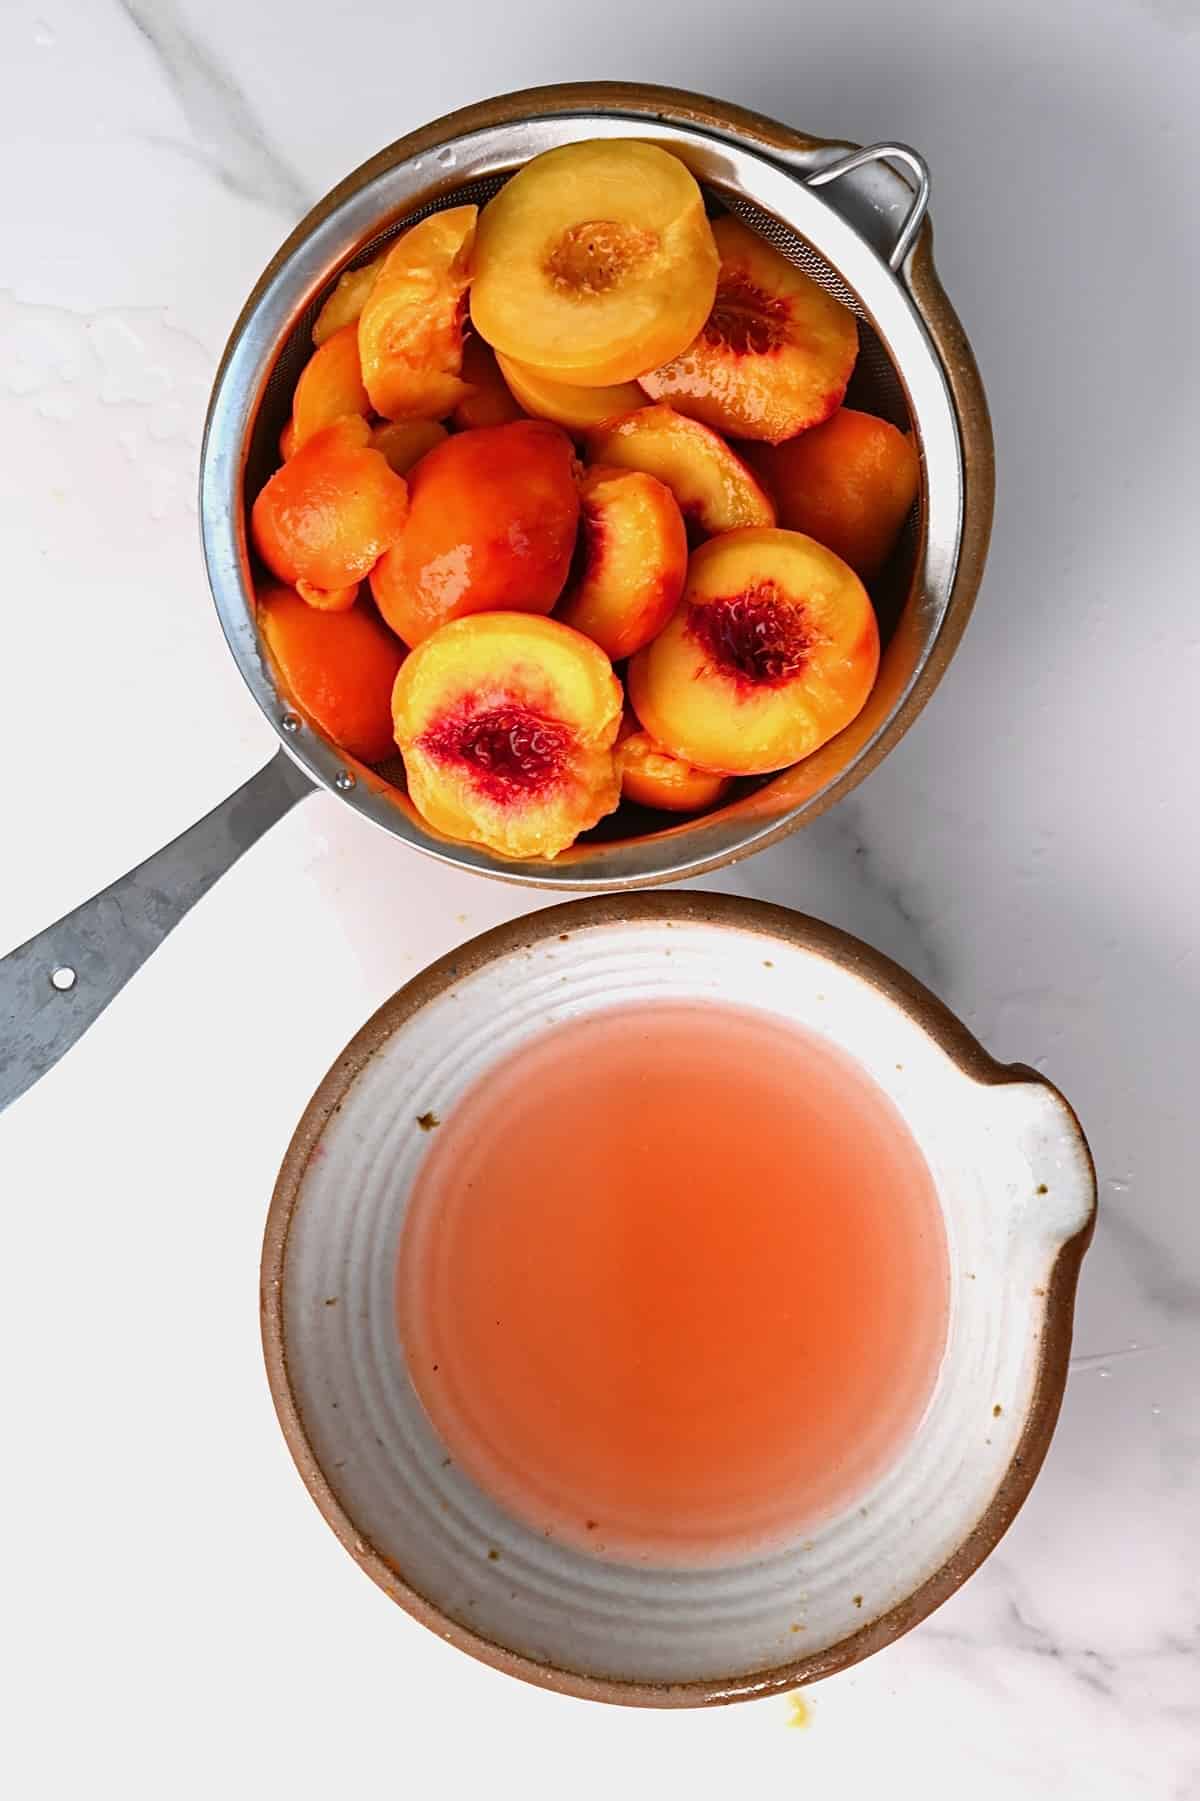 Peaches cut in half for canning